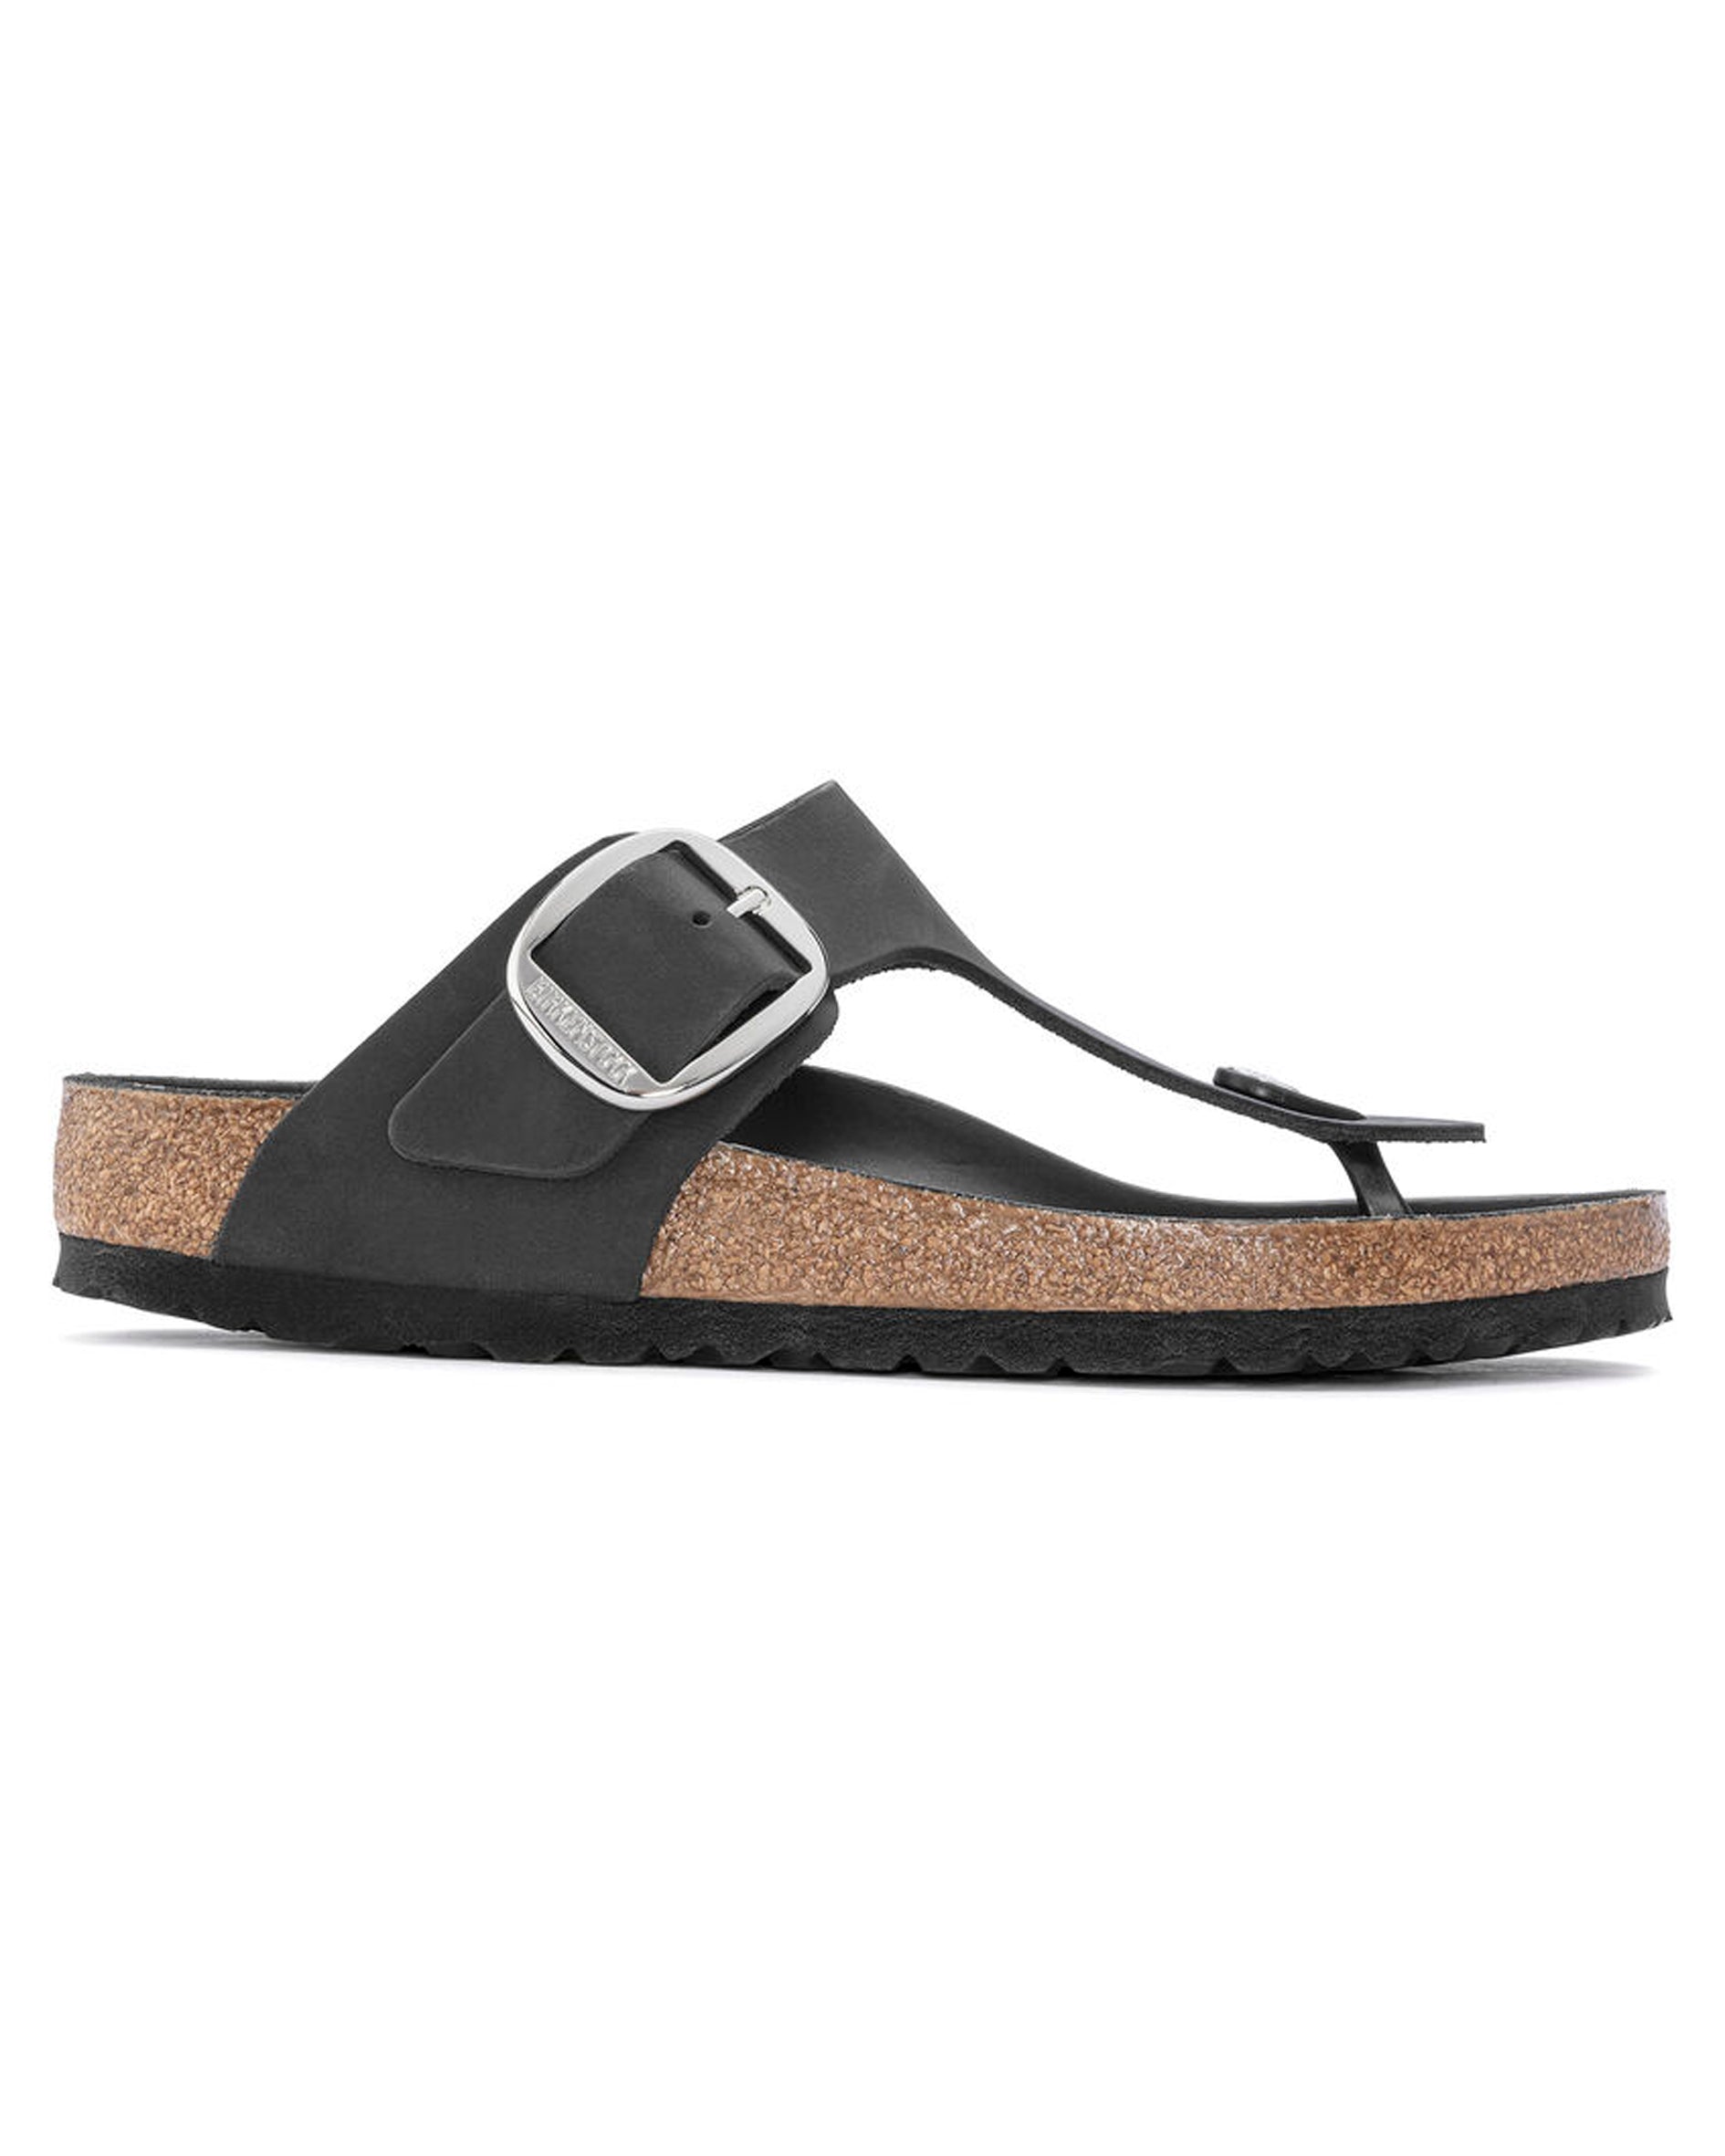 Gizeh Big Buckle Black Oiled Leather Sandals